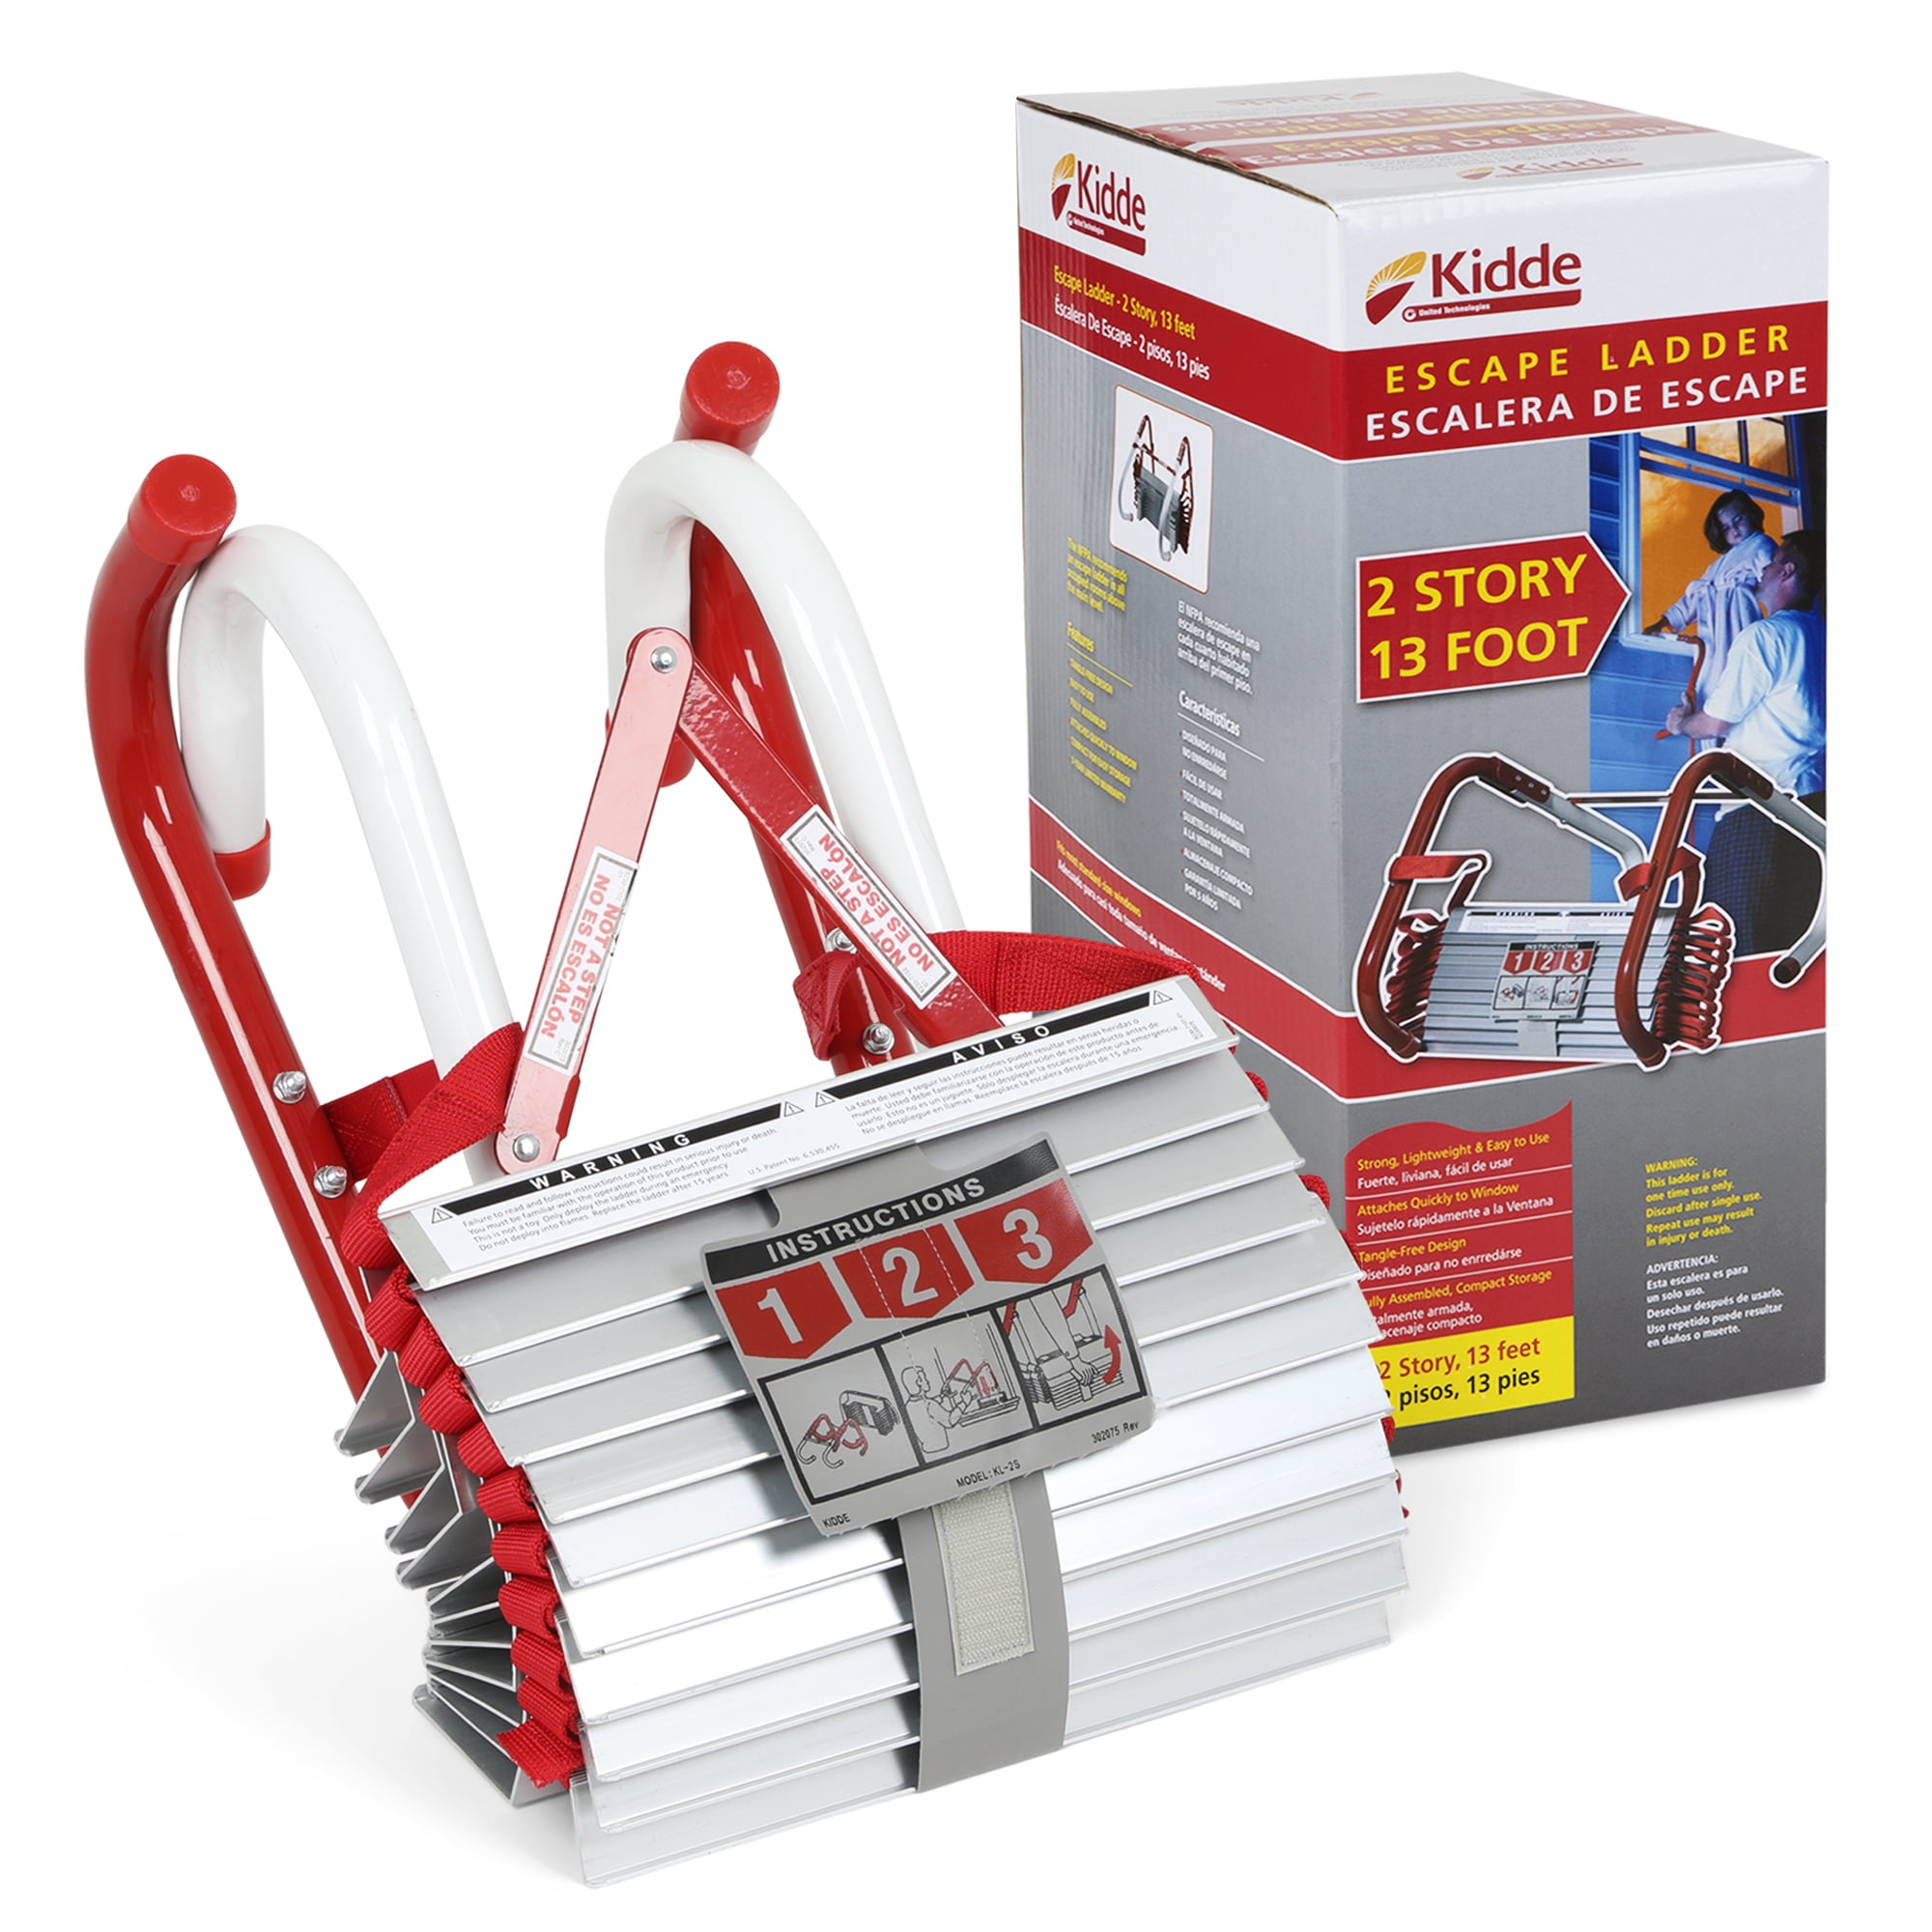 Kidde 468093 KL-2S Two-Story Fire Escape Ladder with Anti-Slip Rungs,  13-Foot 